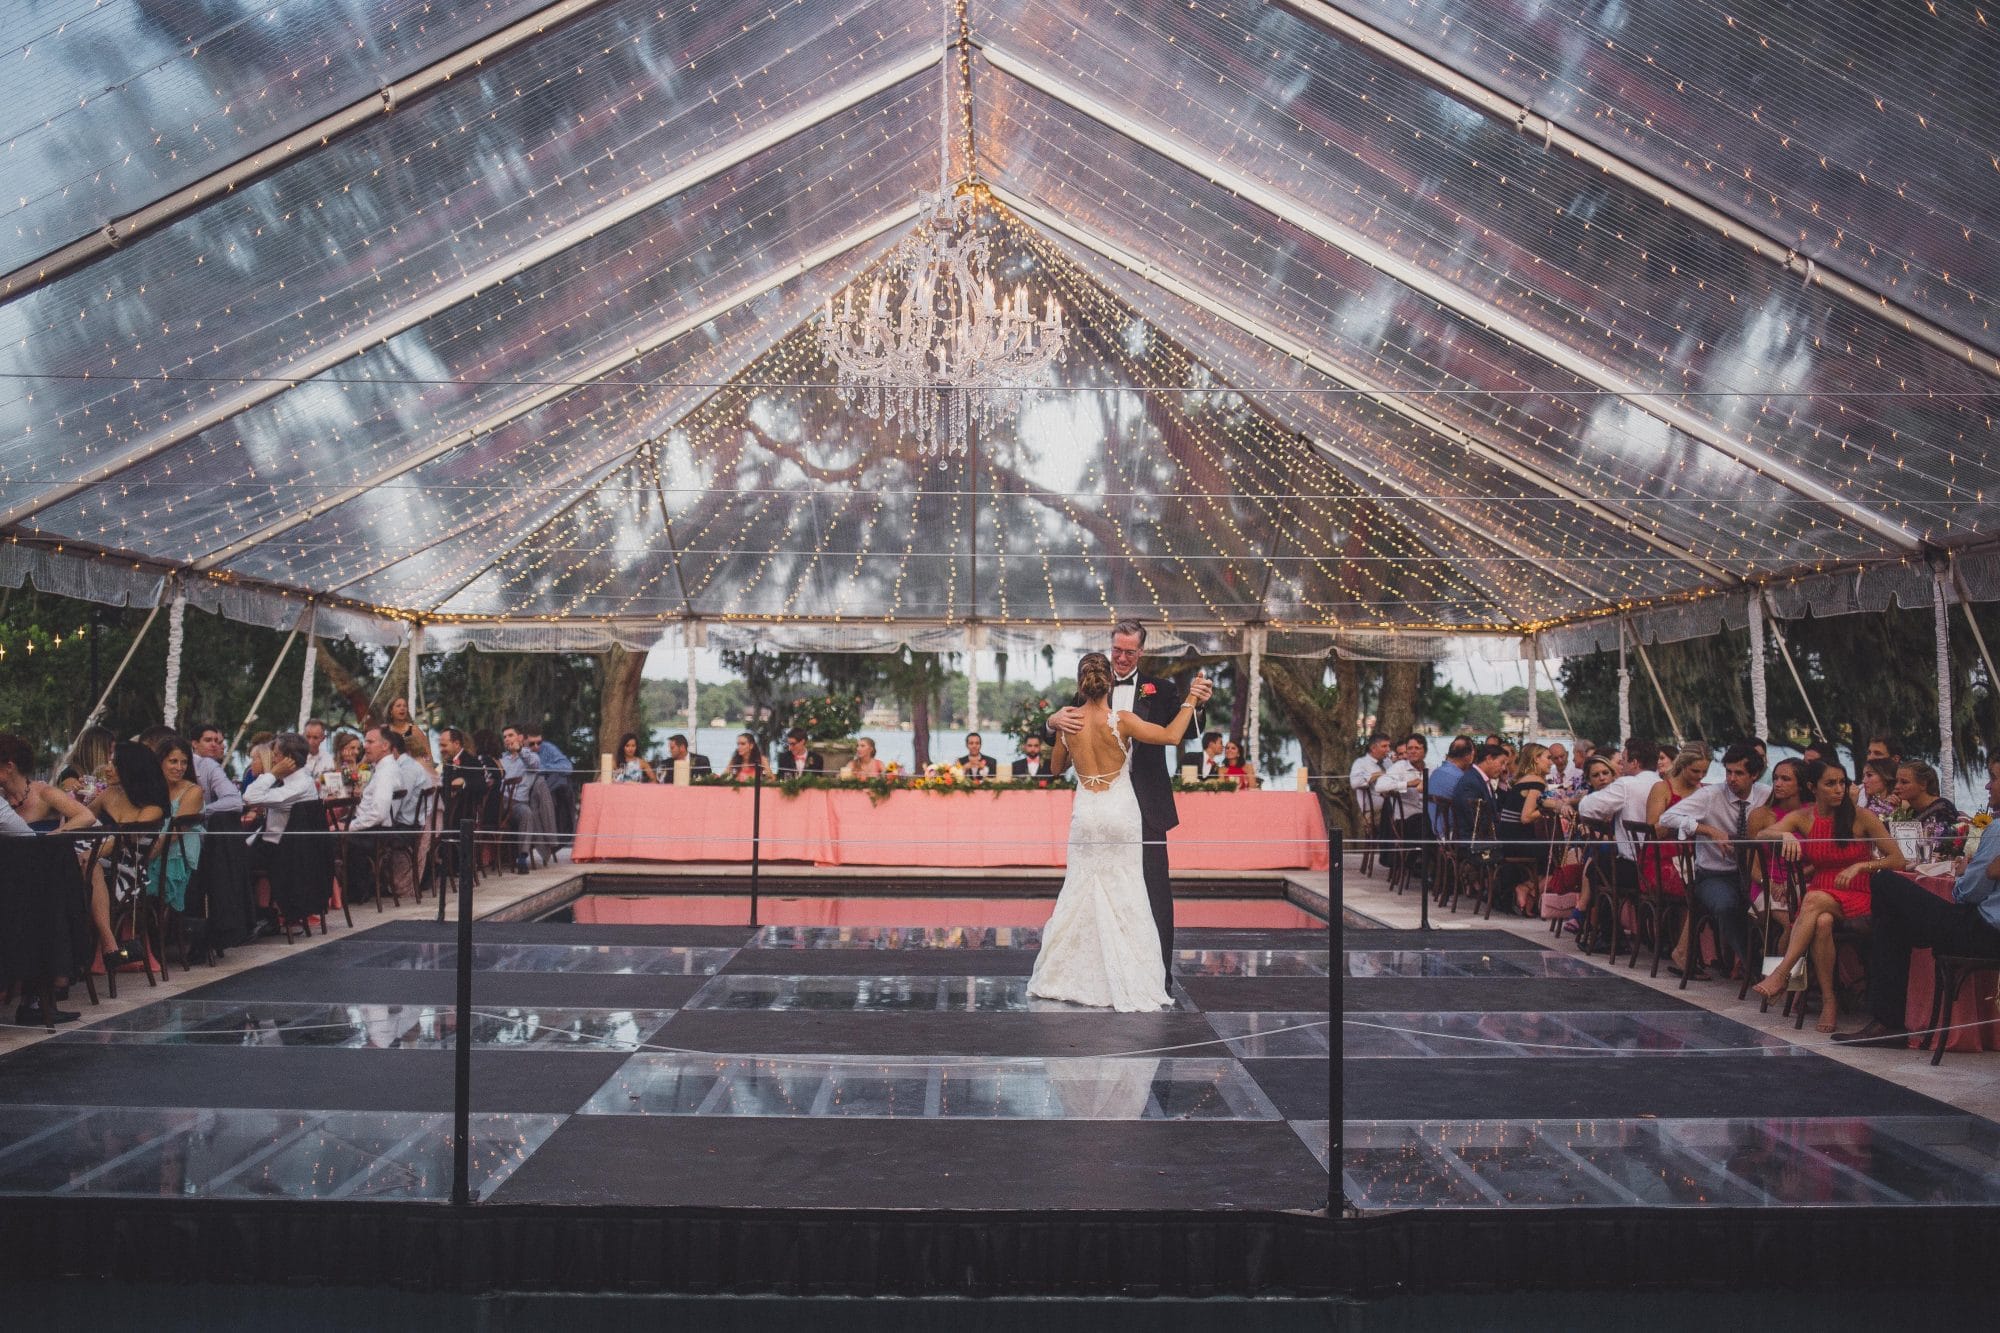 planning a wedding at your home with transparent tent